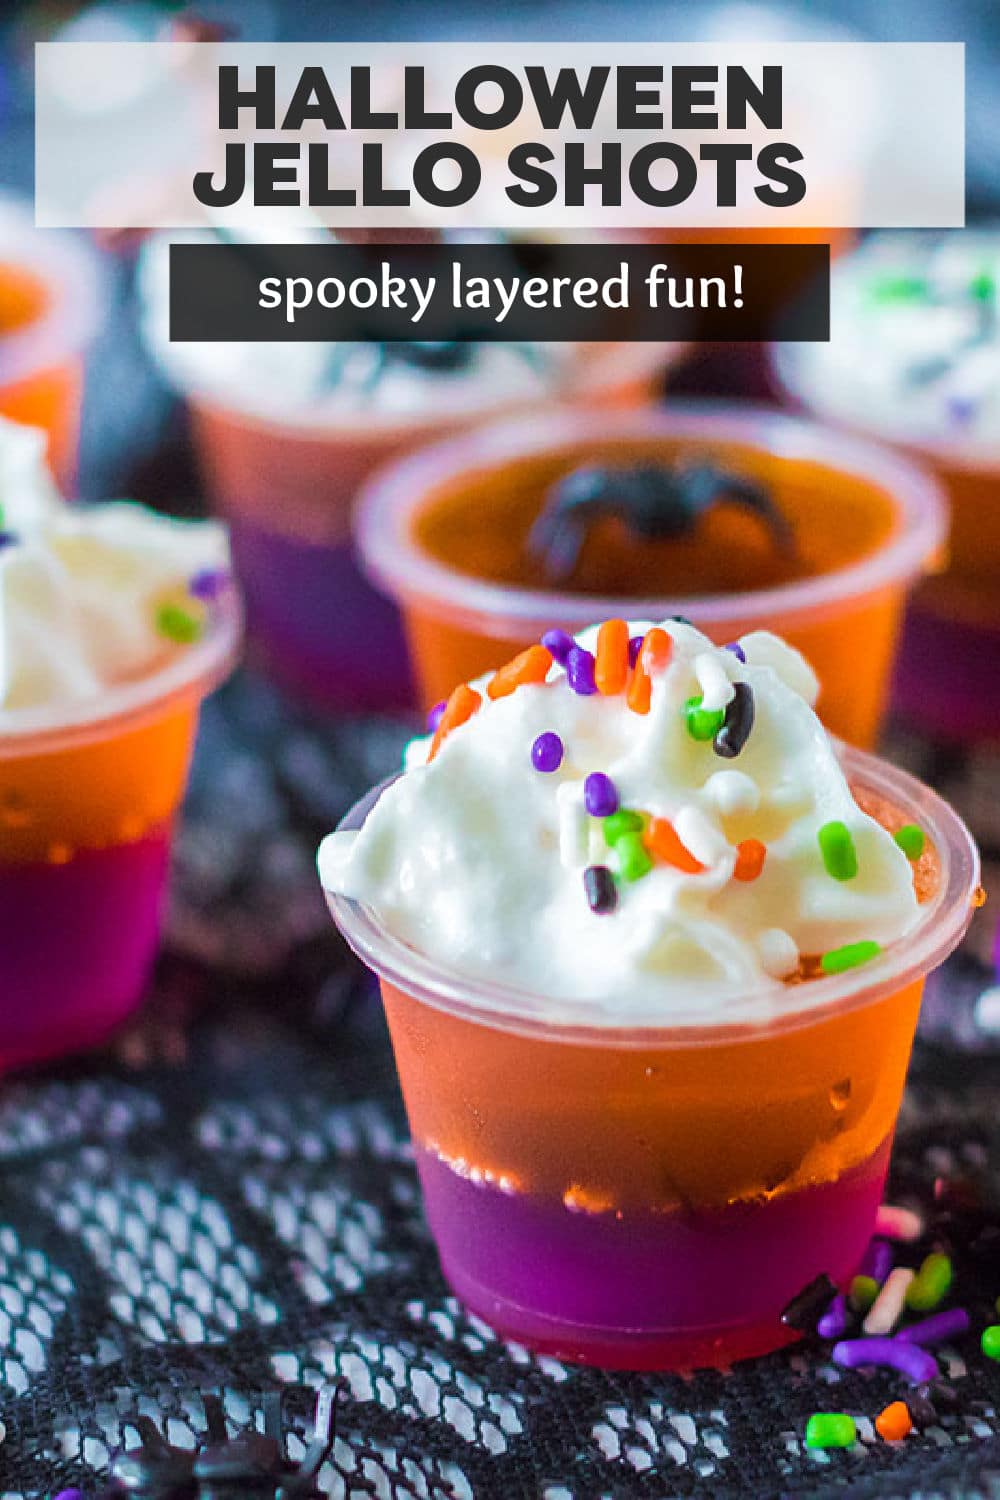 Perfectly spooky layered Halloween Jello Shots are made with vodka and will be a huge hit at your next Halloween party. Orange and purple jello are layered together then topped with whipped cream, Halloween sprinkles, and chocolate spider webs. Simple to make and fun to enjoy! | www.persnicketyplates.com